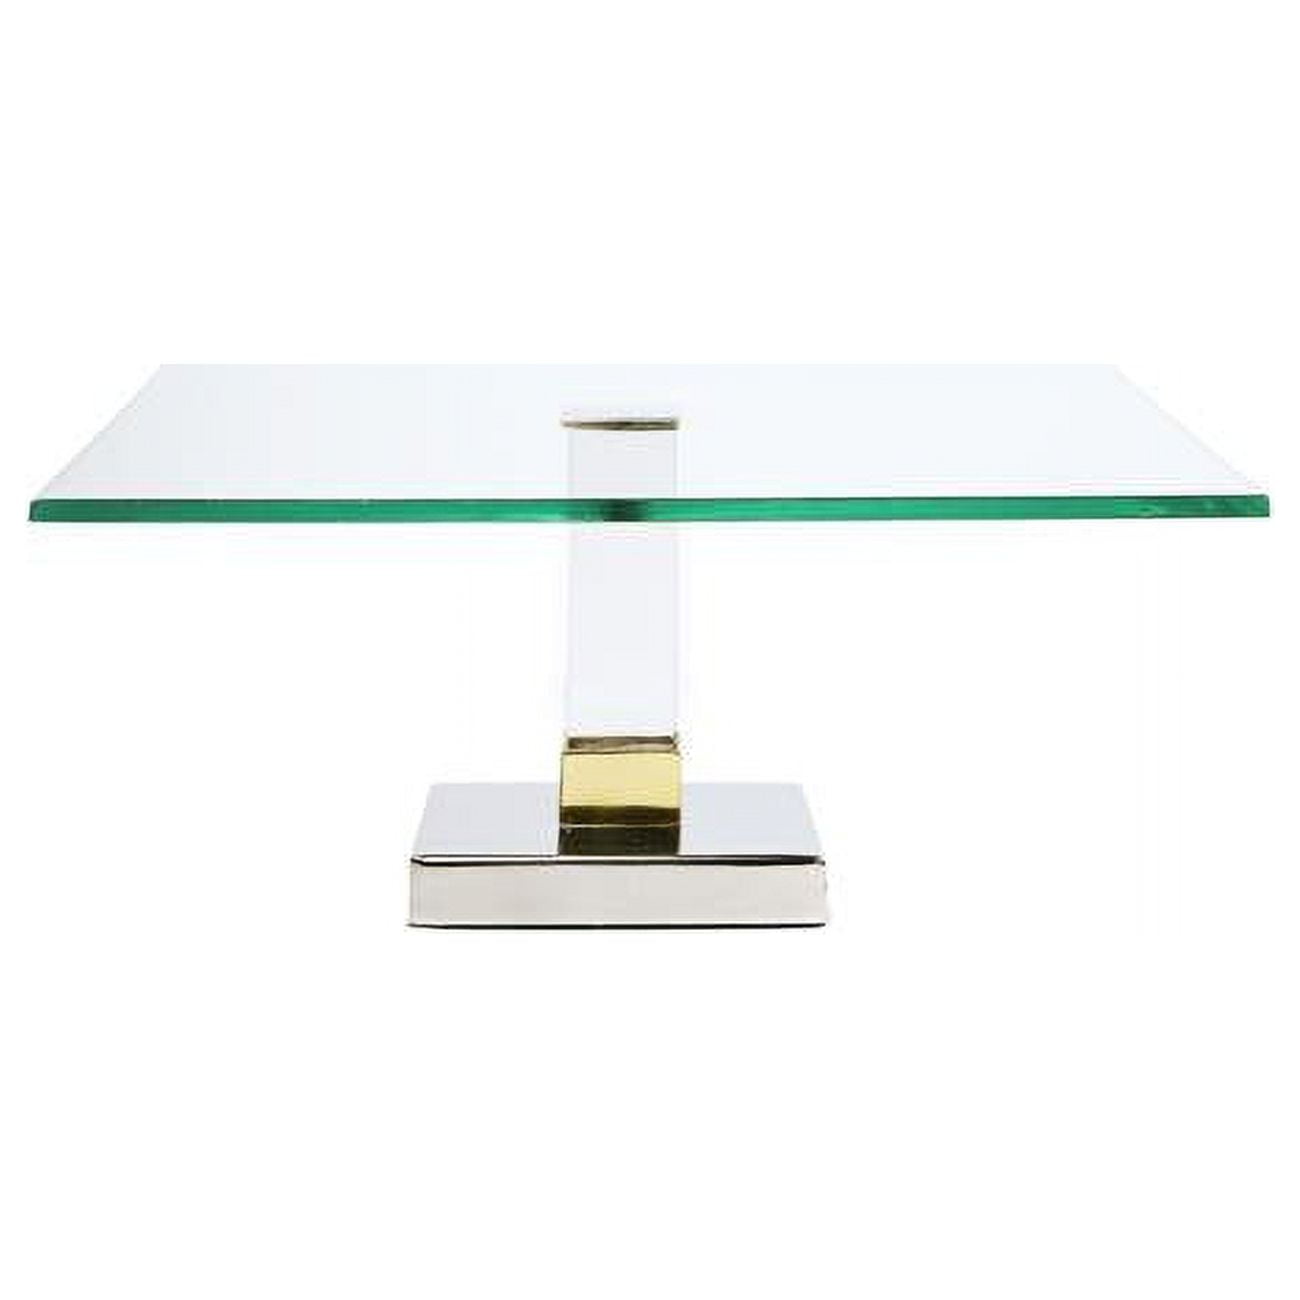 Classic Touch Gat109 Square Glass Cake Stand With Acrylic Stem, 8 X 12 X 8 In.